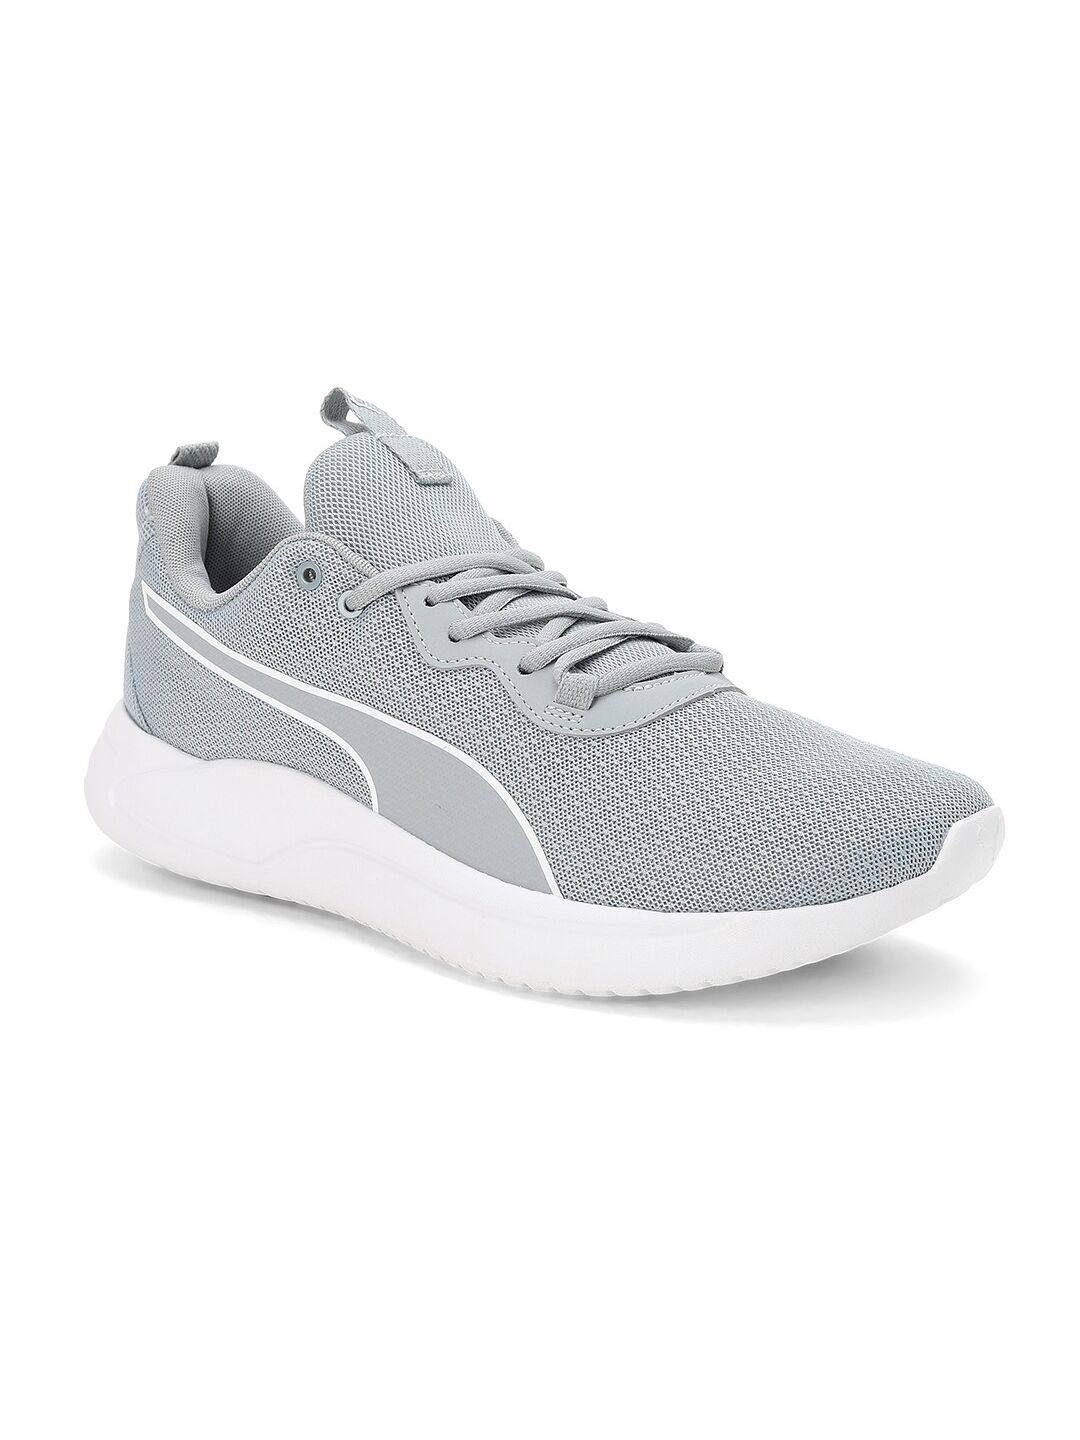 Puma Unisex Grey And White Resolve Modern Running Sports Shoes Price in India